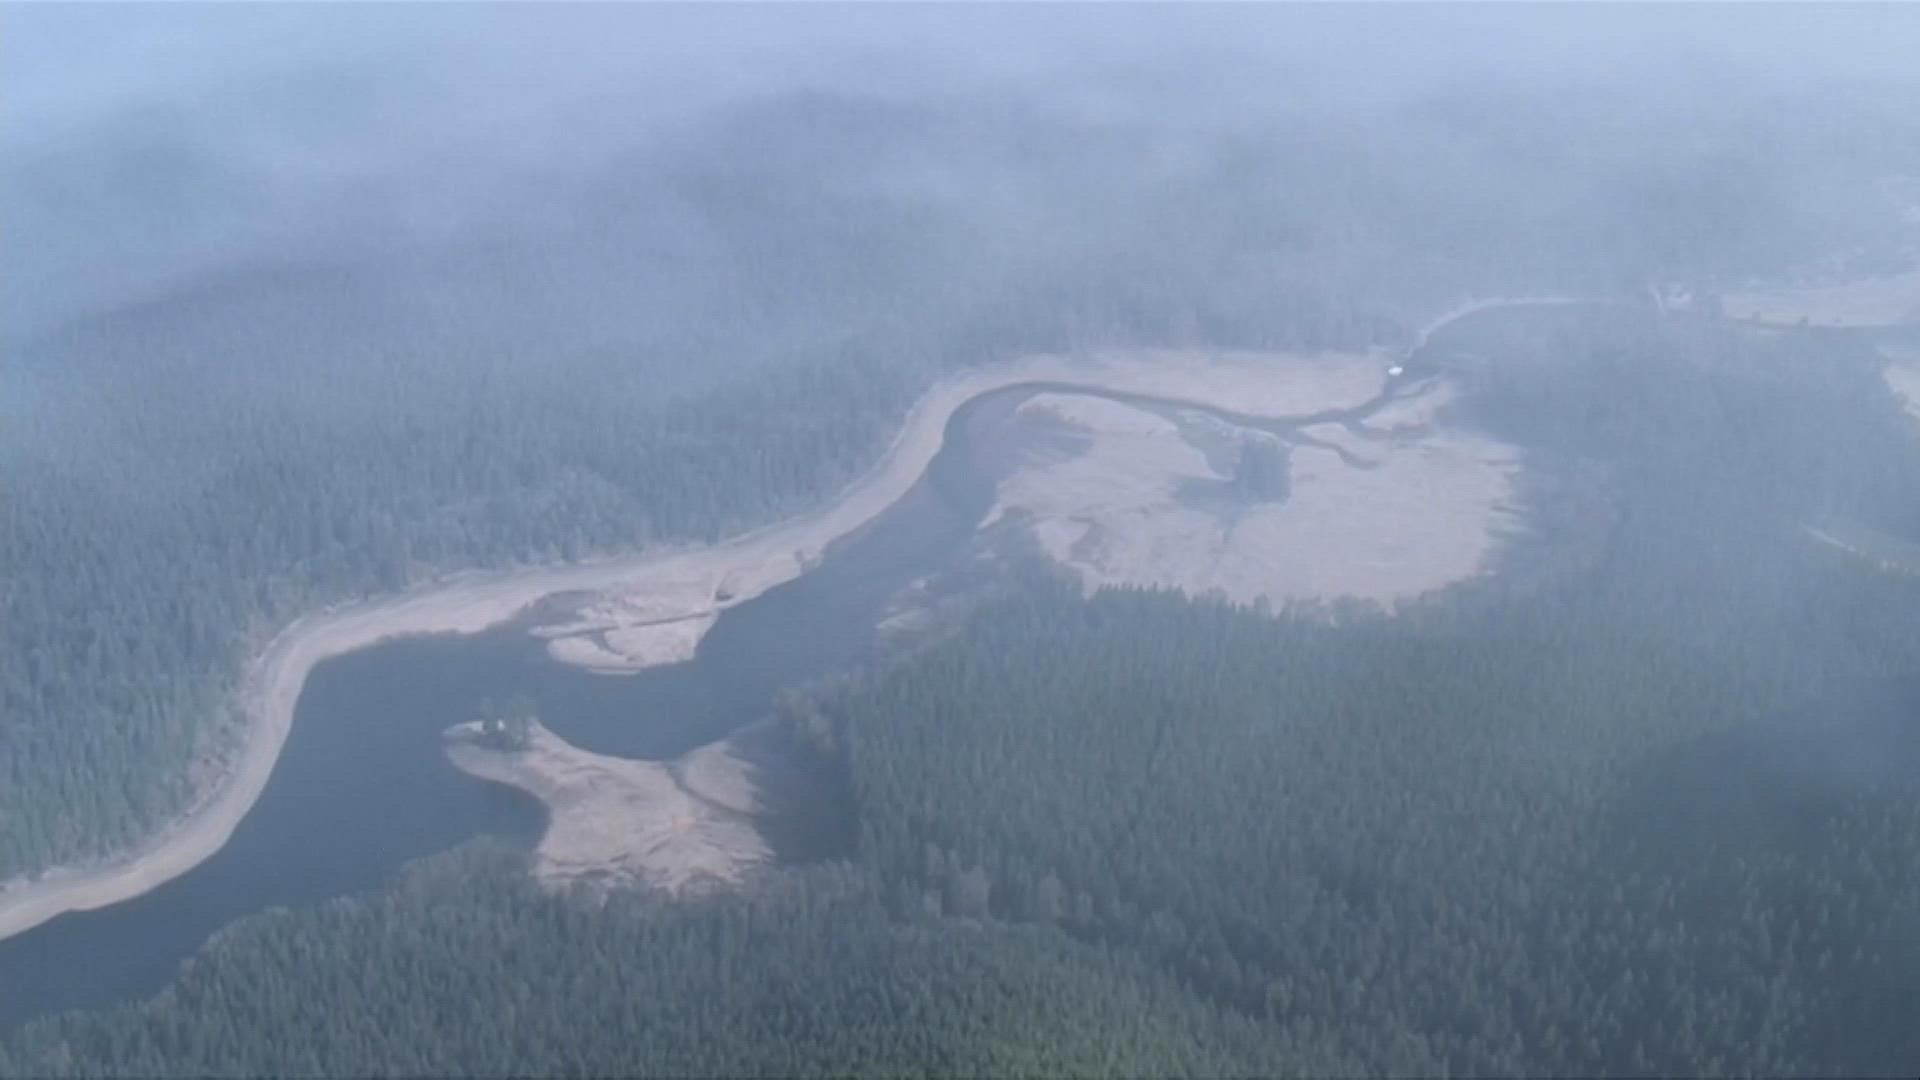 North Bend residents are asked to further conserve water following extended dry spell.